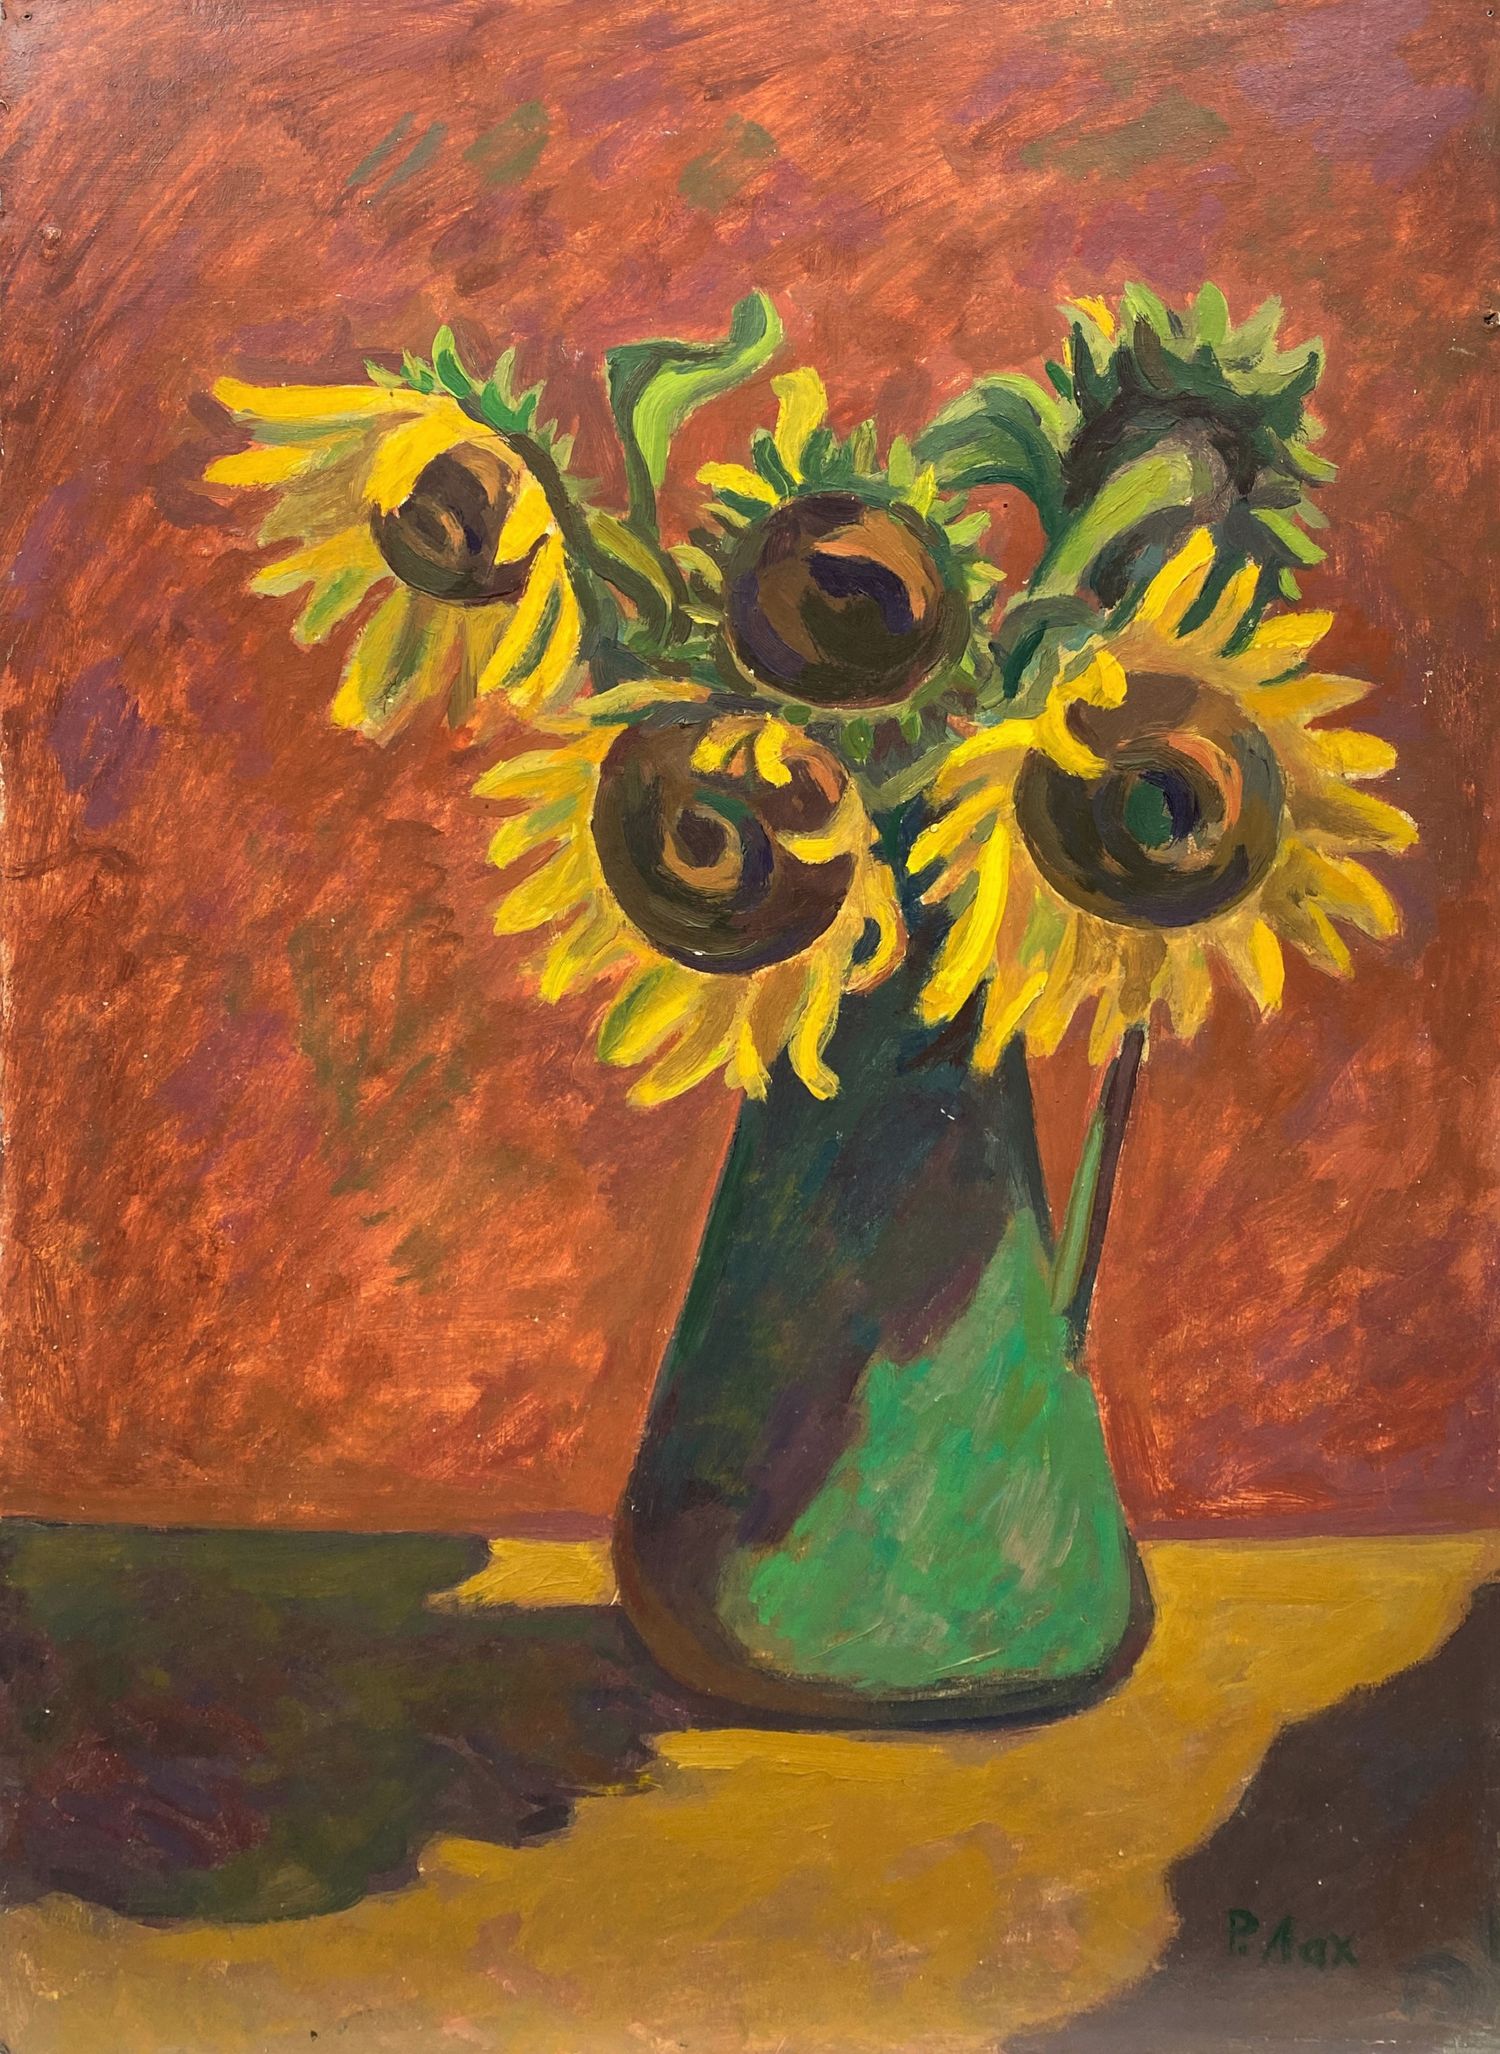 "Sunflowers in the evening light"